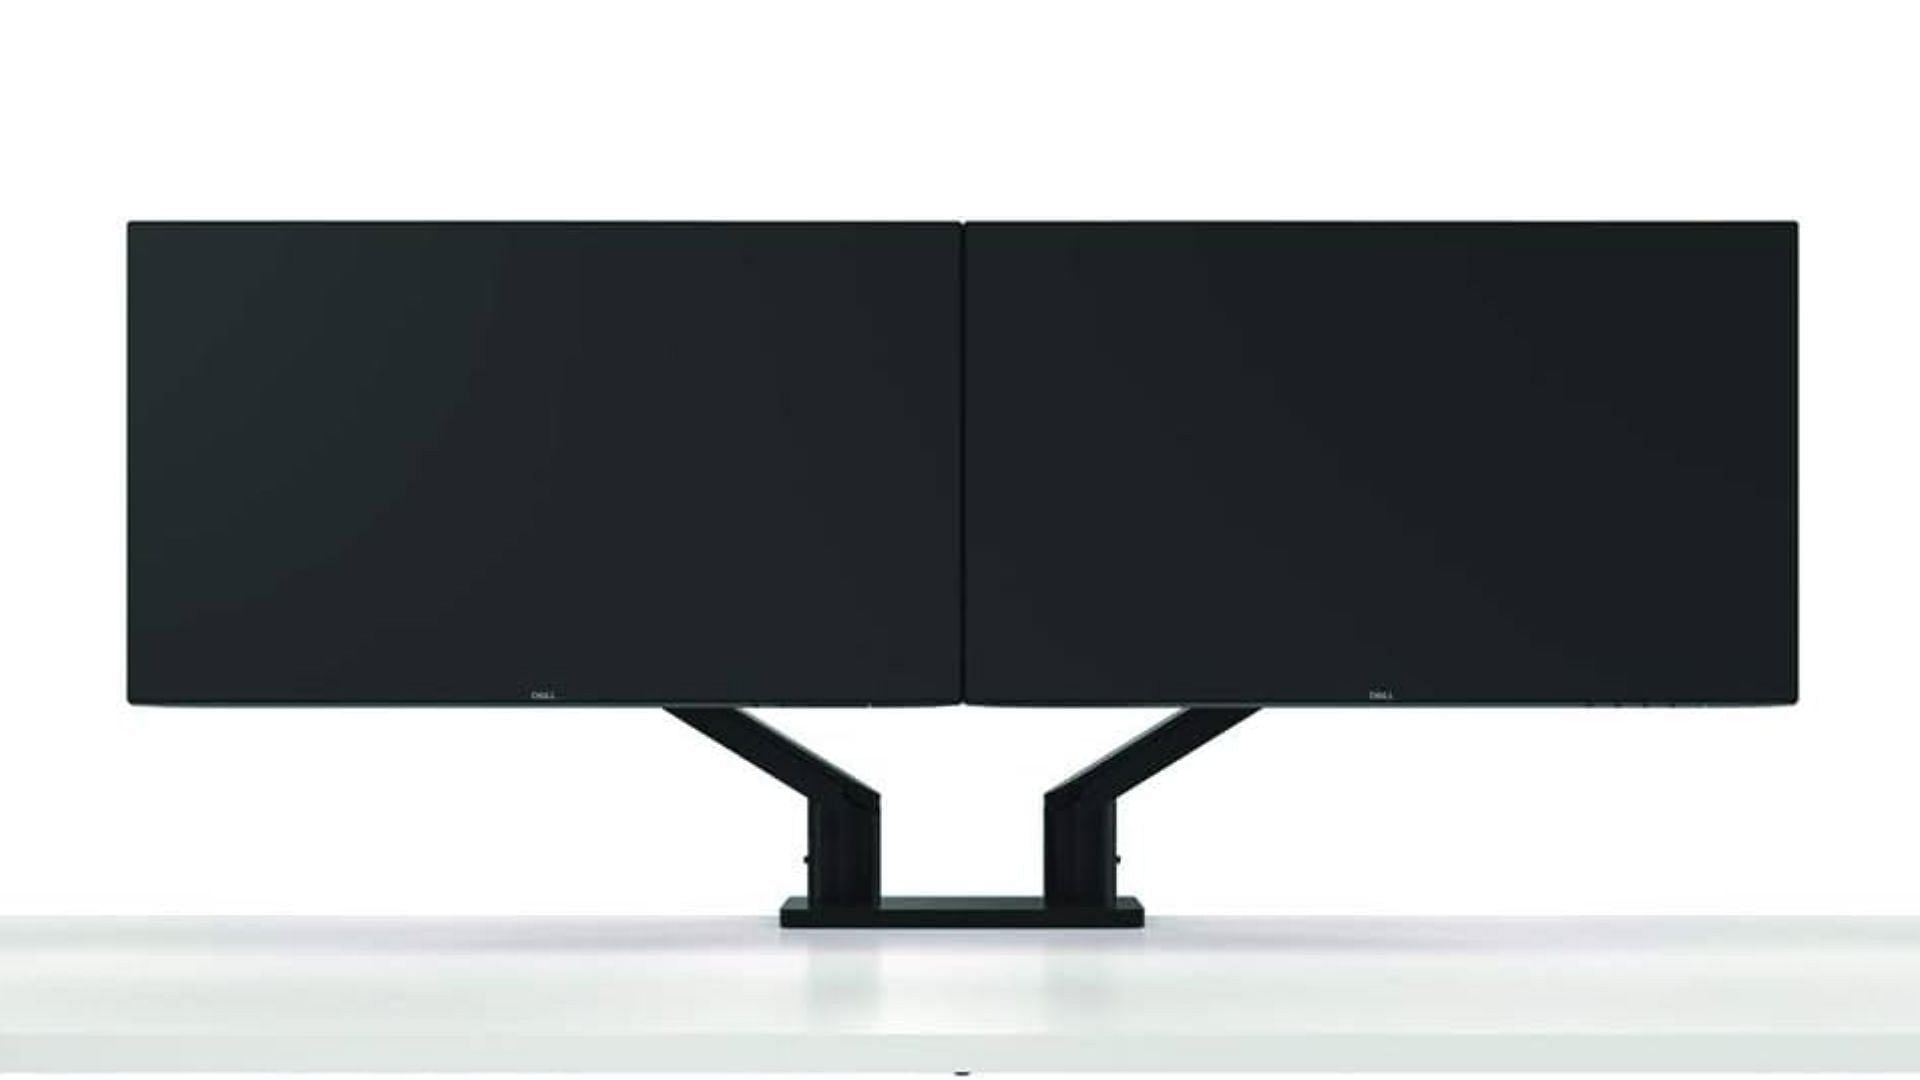 Dual monitor setup can offer an immersive experience (Image via Amazon/Dell)